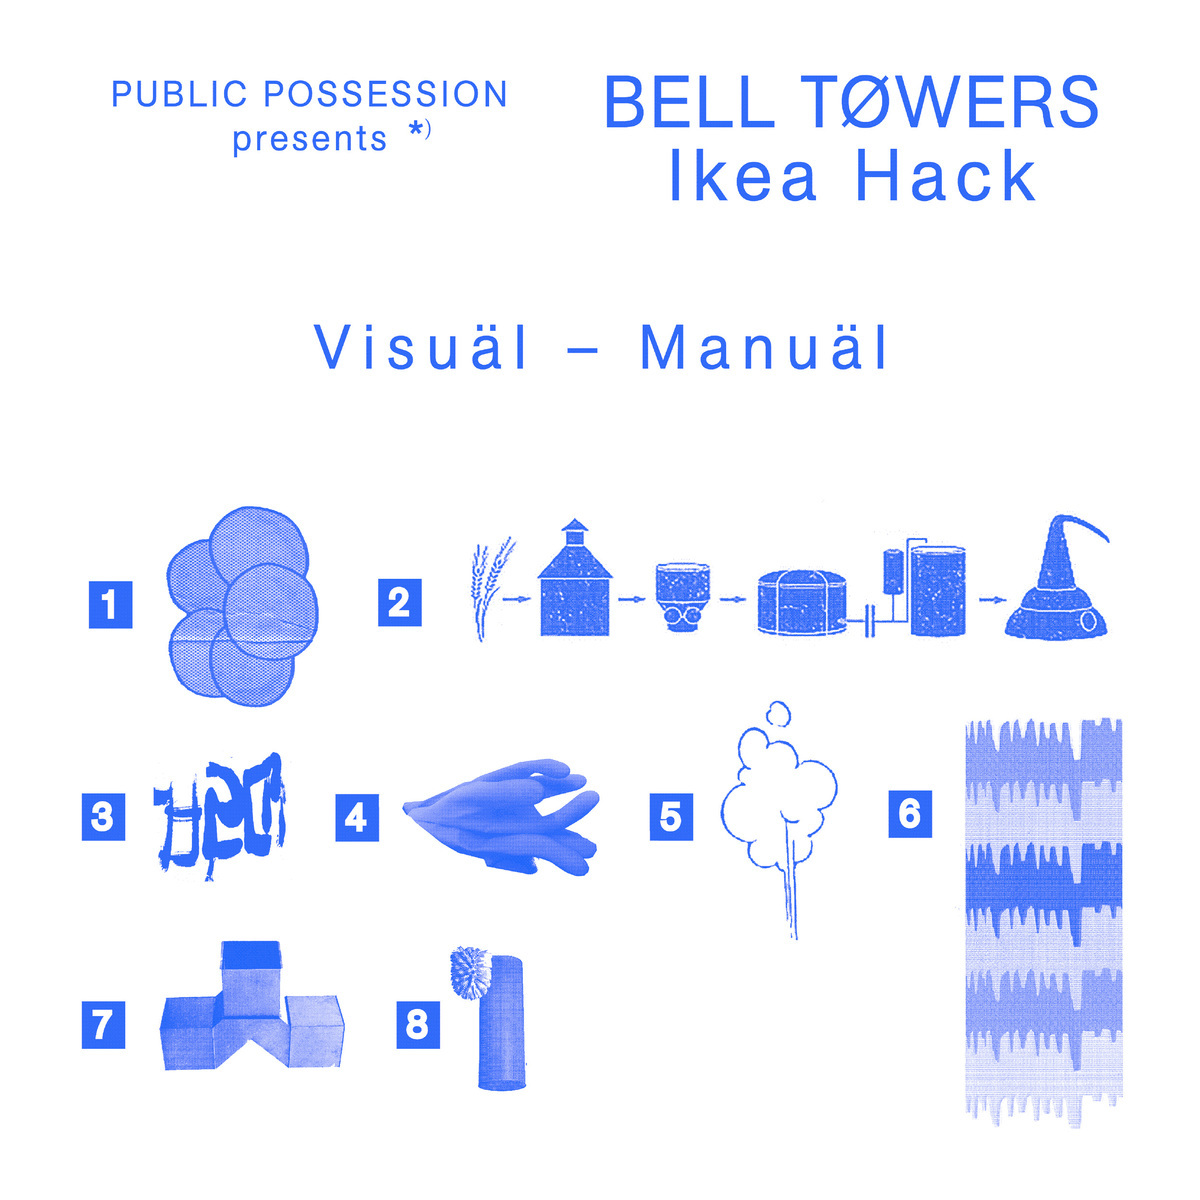 Bell Towers - Ikea Hack / Public Possession